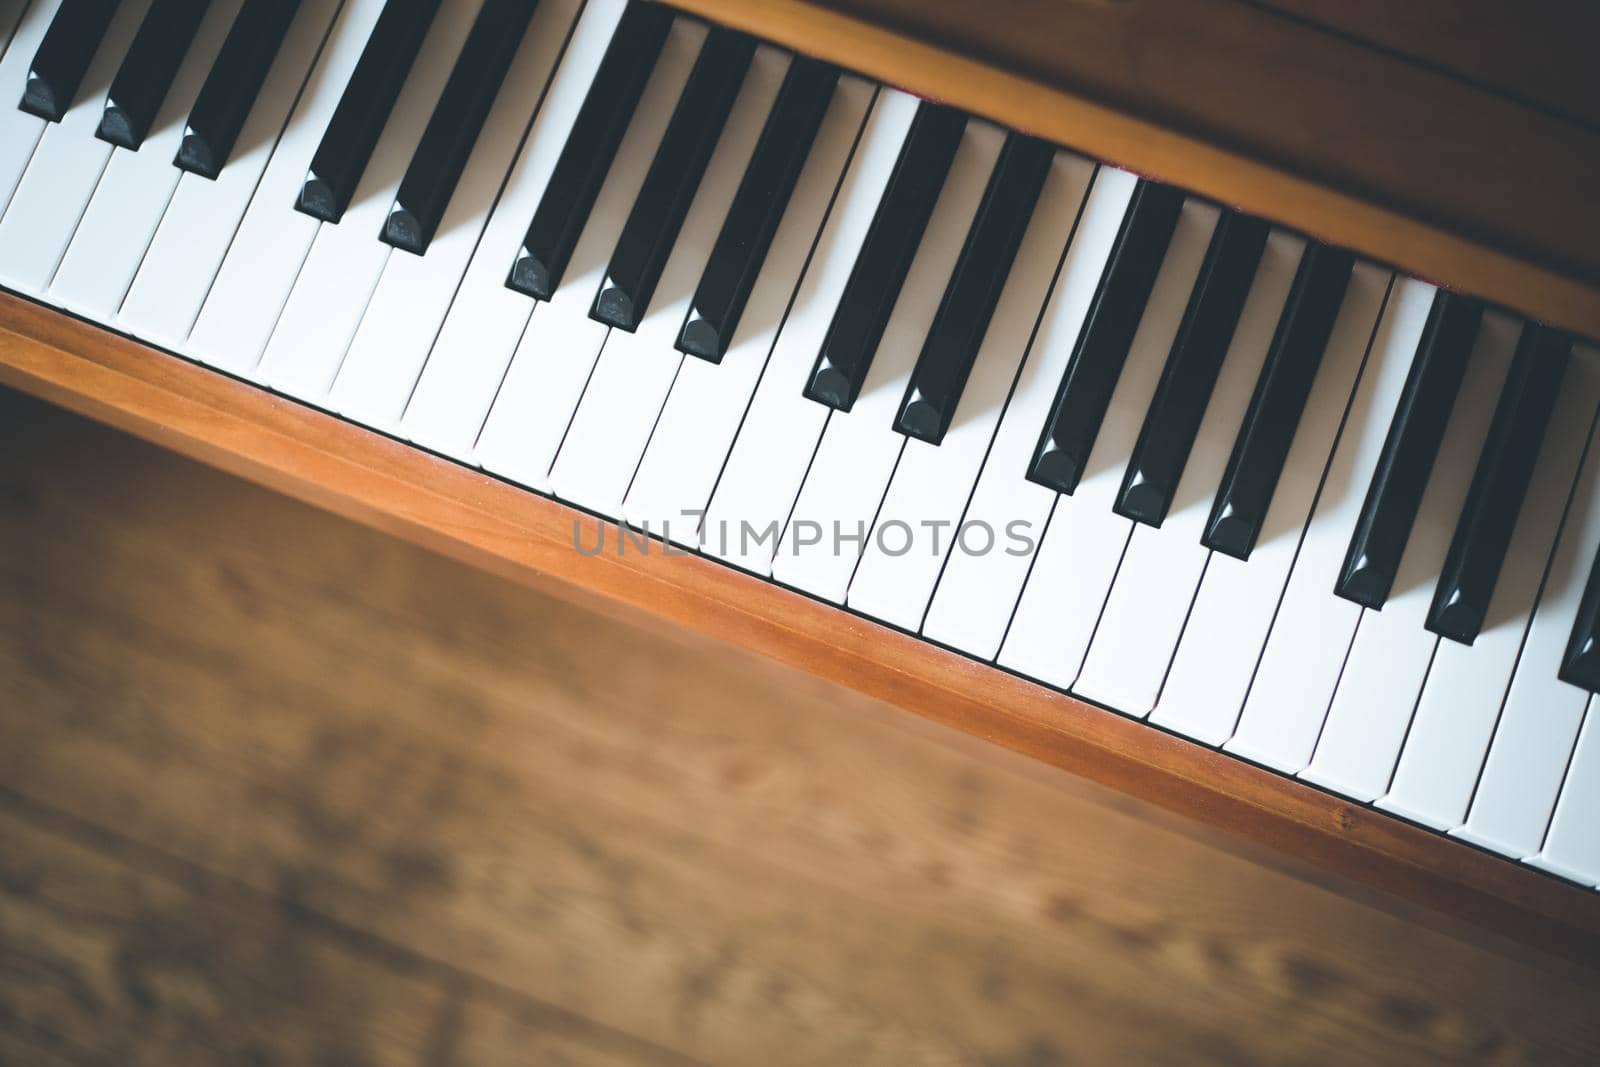 Vintage wooden piano. Keys in the foreground, wooden floor with text space in the blurry background by Daxenbichler